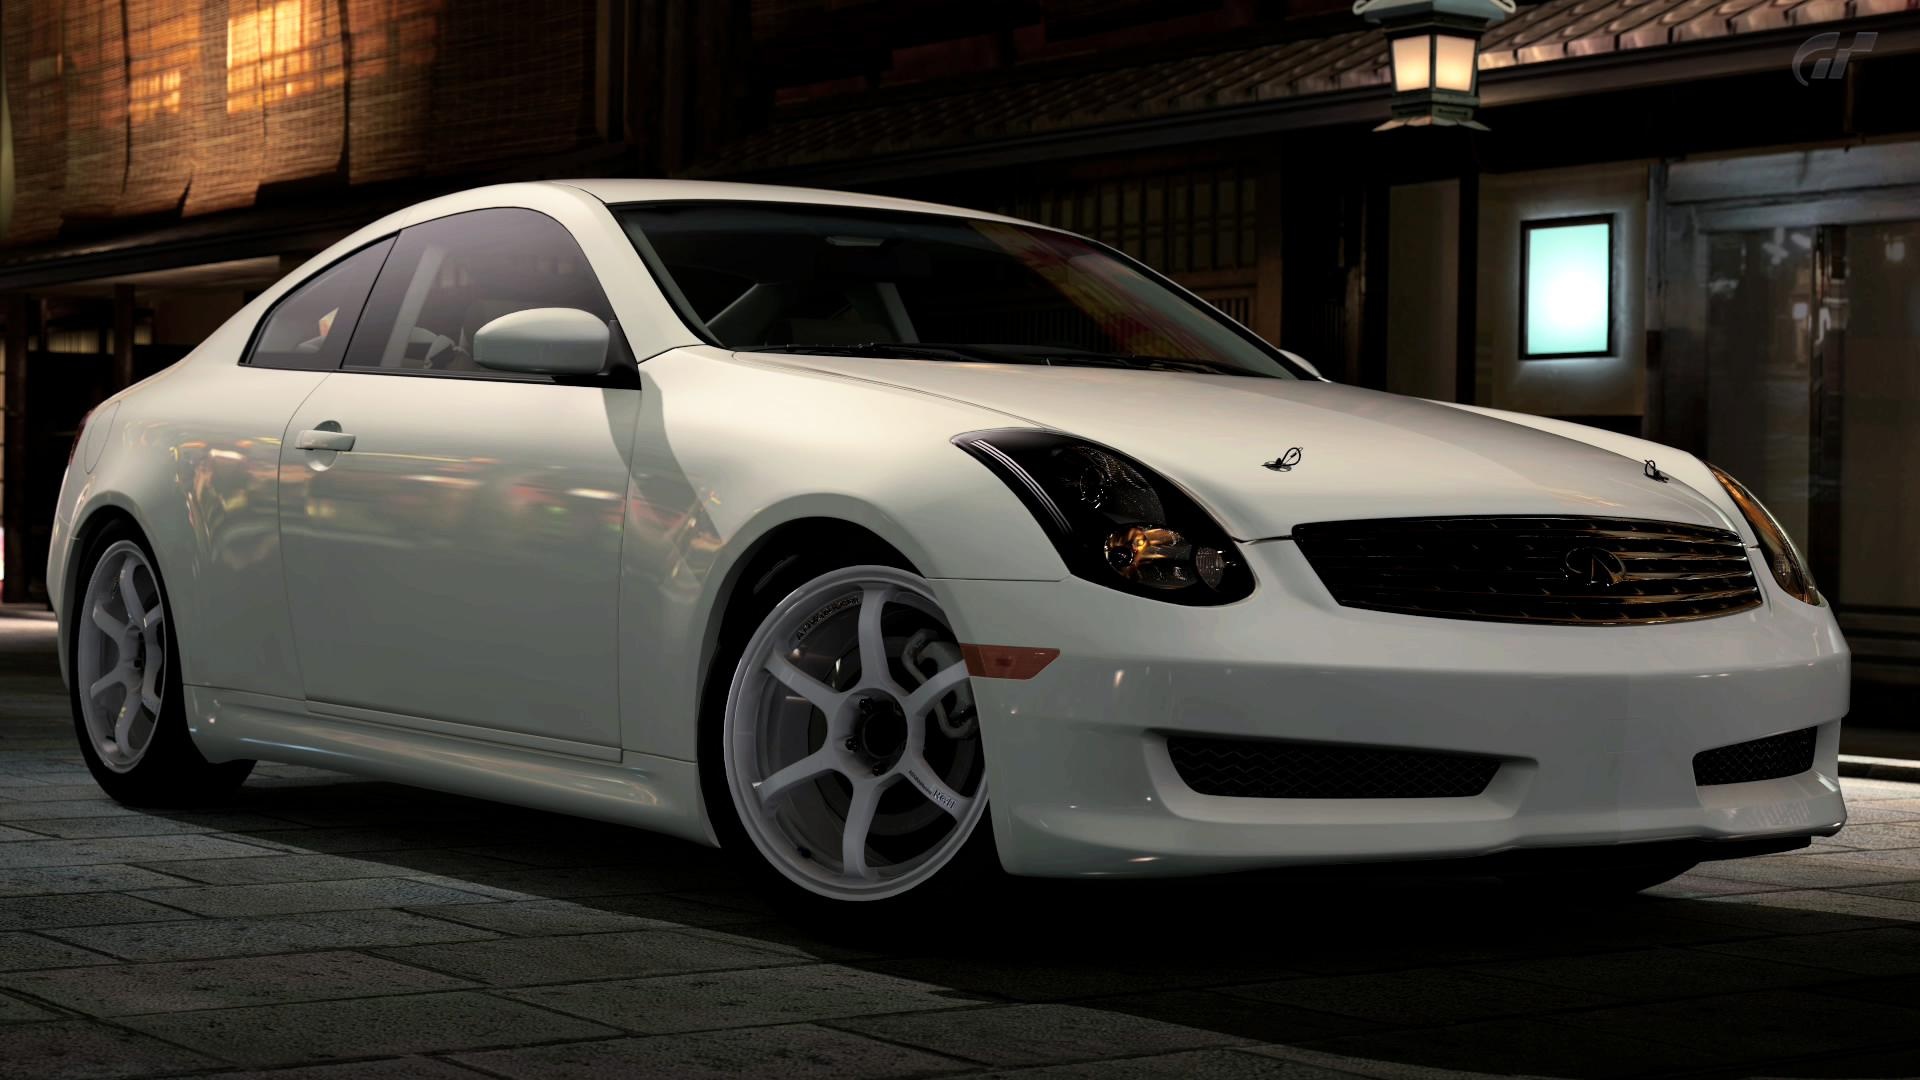 Infiniti G35 Coupe, Unforgettable design, Gran Turismo 7 enthusiasts, Bring back G35 series, 1920x1080 Full HD Desktop